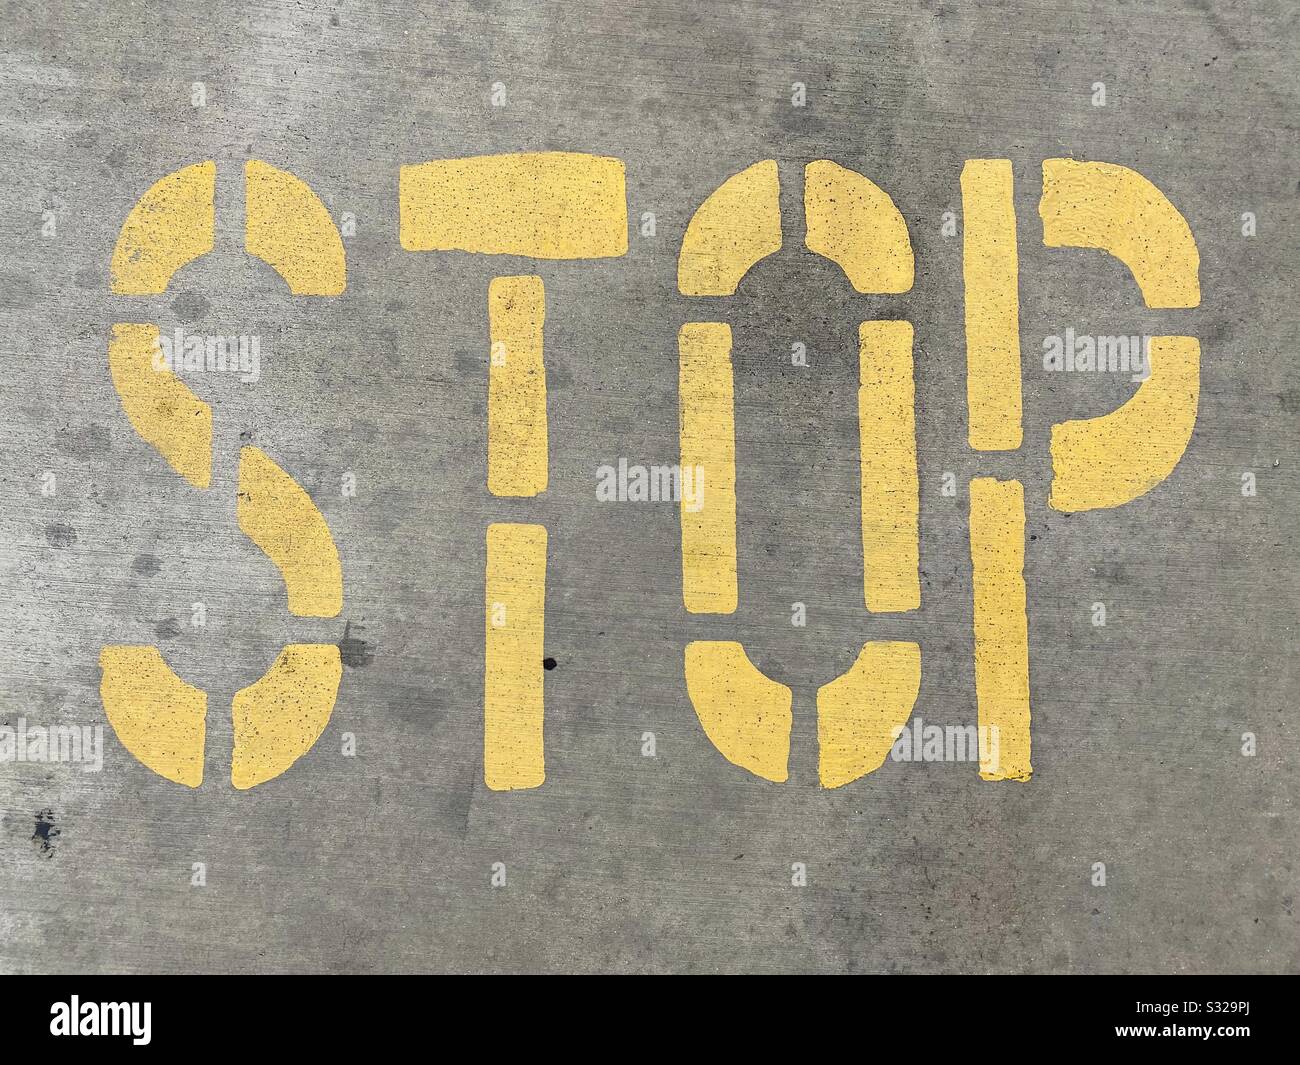 Stop sign letter stencil with yellow paint on concrete Stock Photo